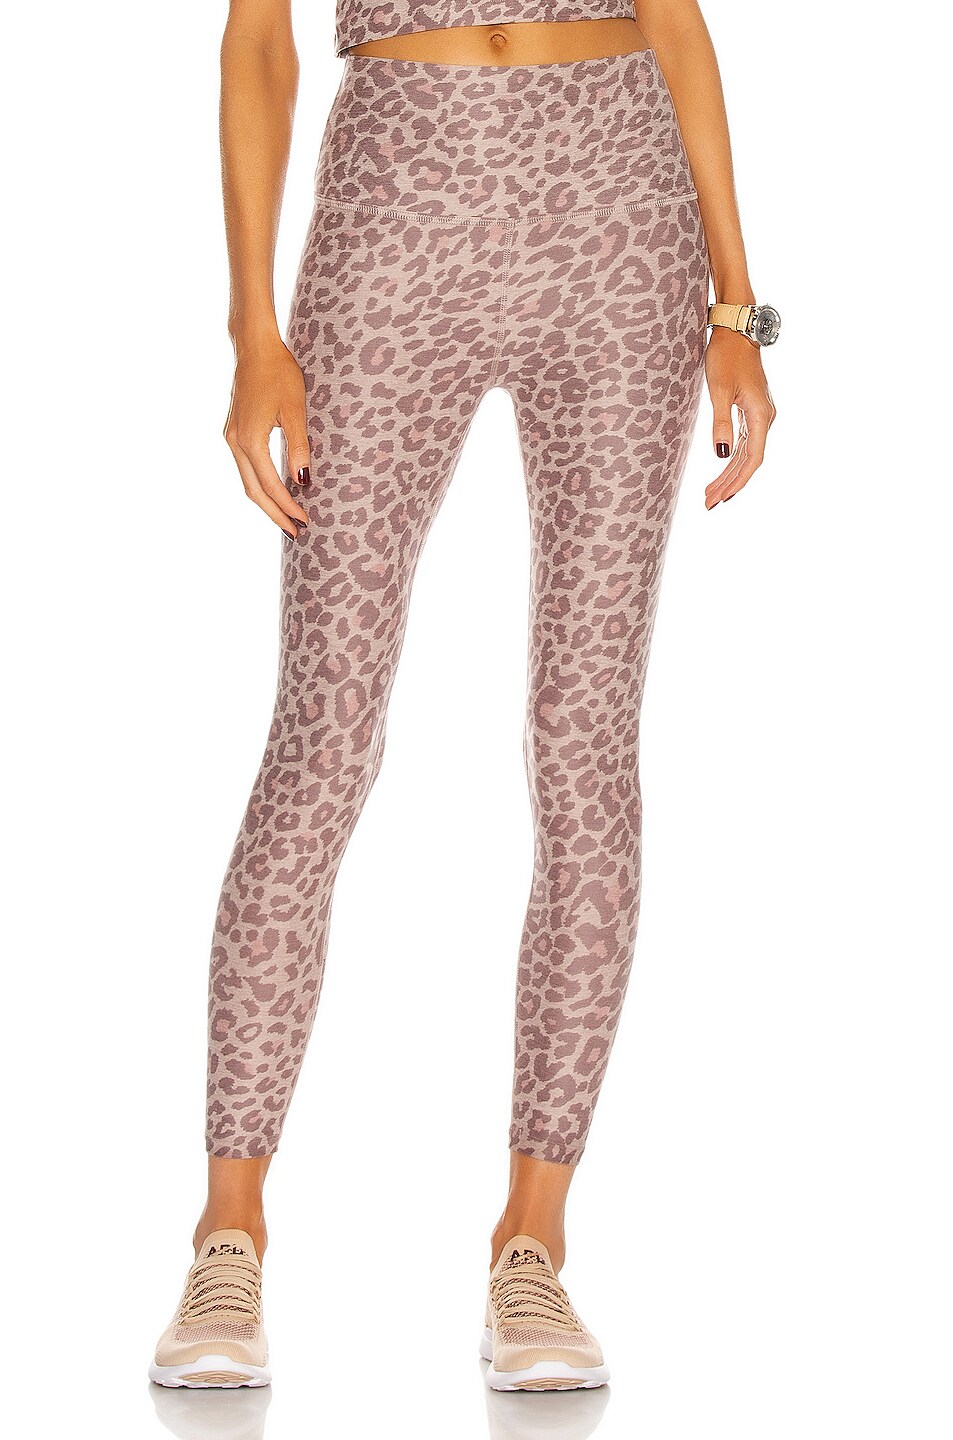 Image 1 of Beyond Yoga Spacedye Printed Caught In The Midi High Waisted Legging in Chai Cocoa Brown Leopard